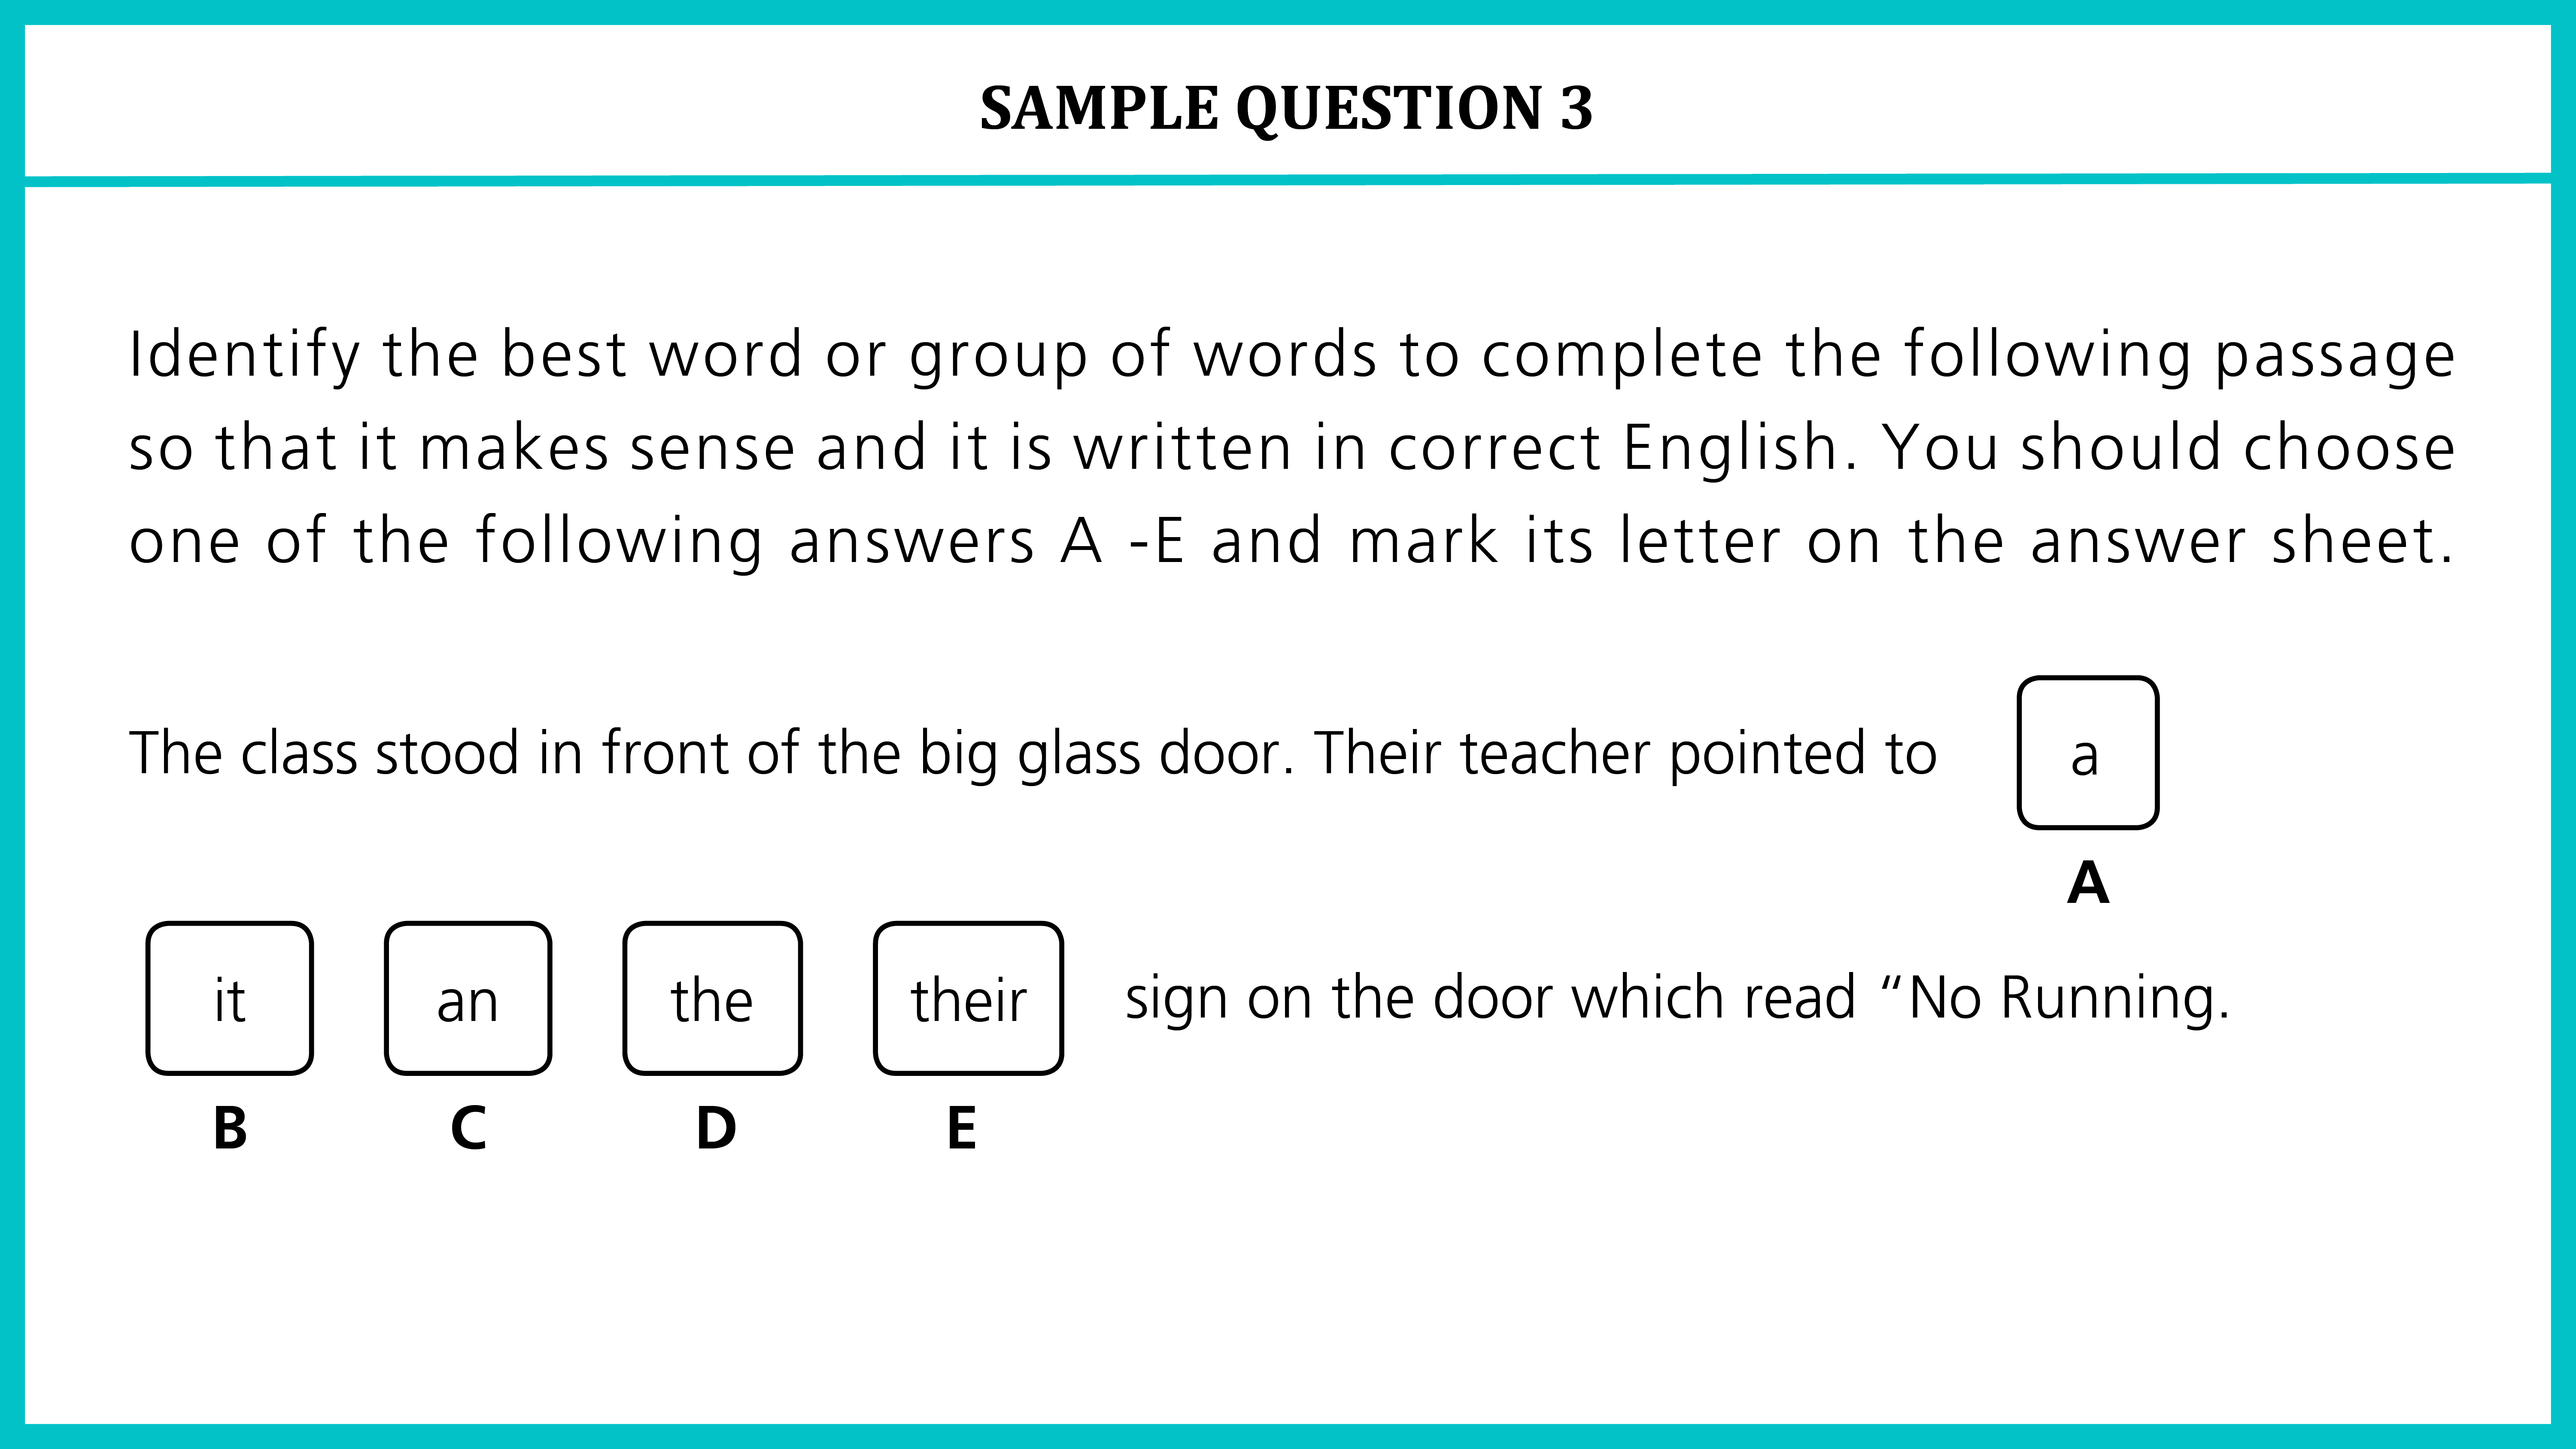 11+ GL Article English Sample Question 03